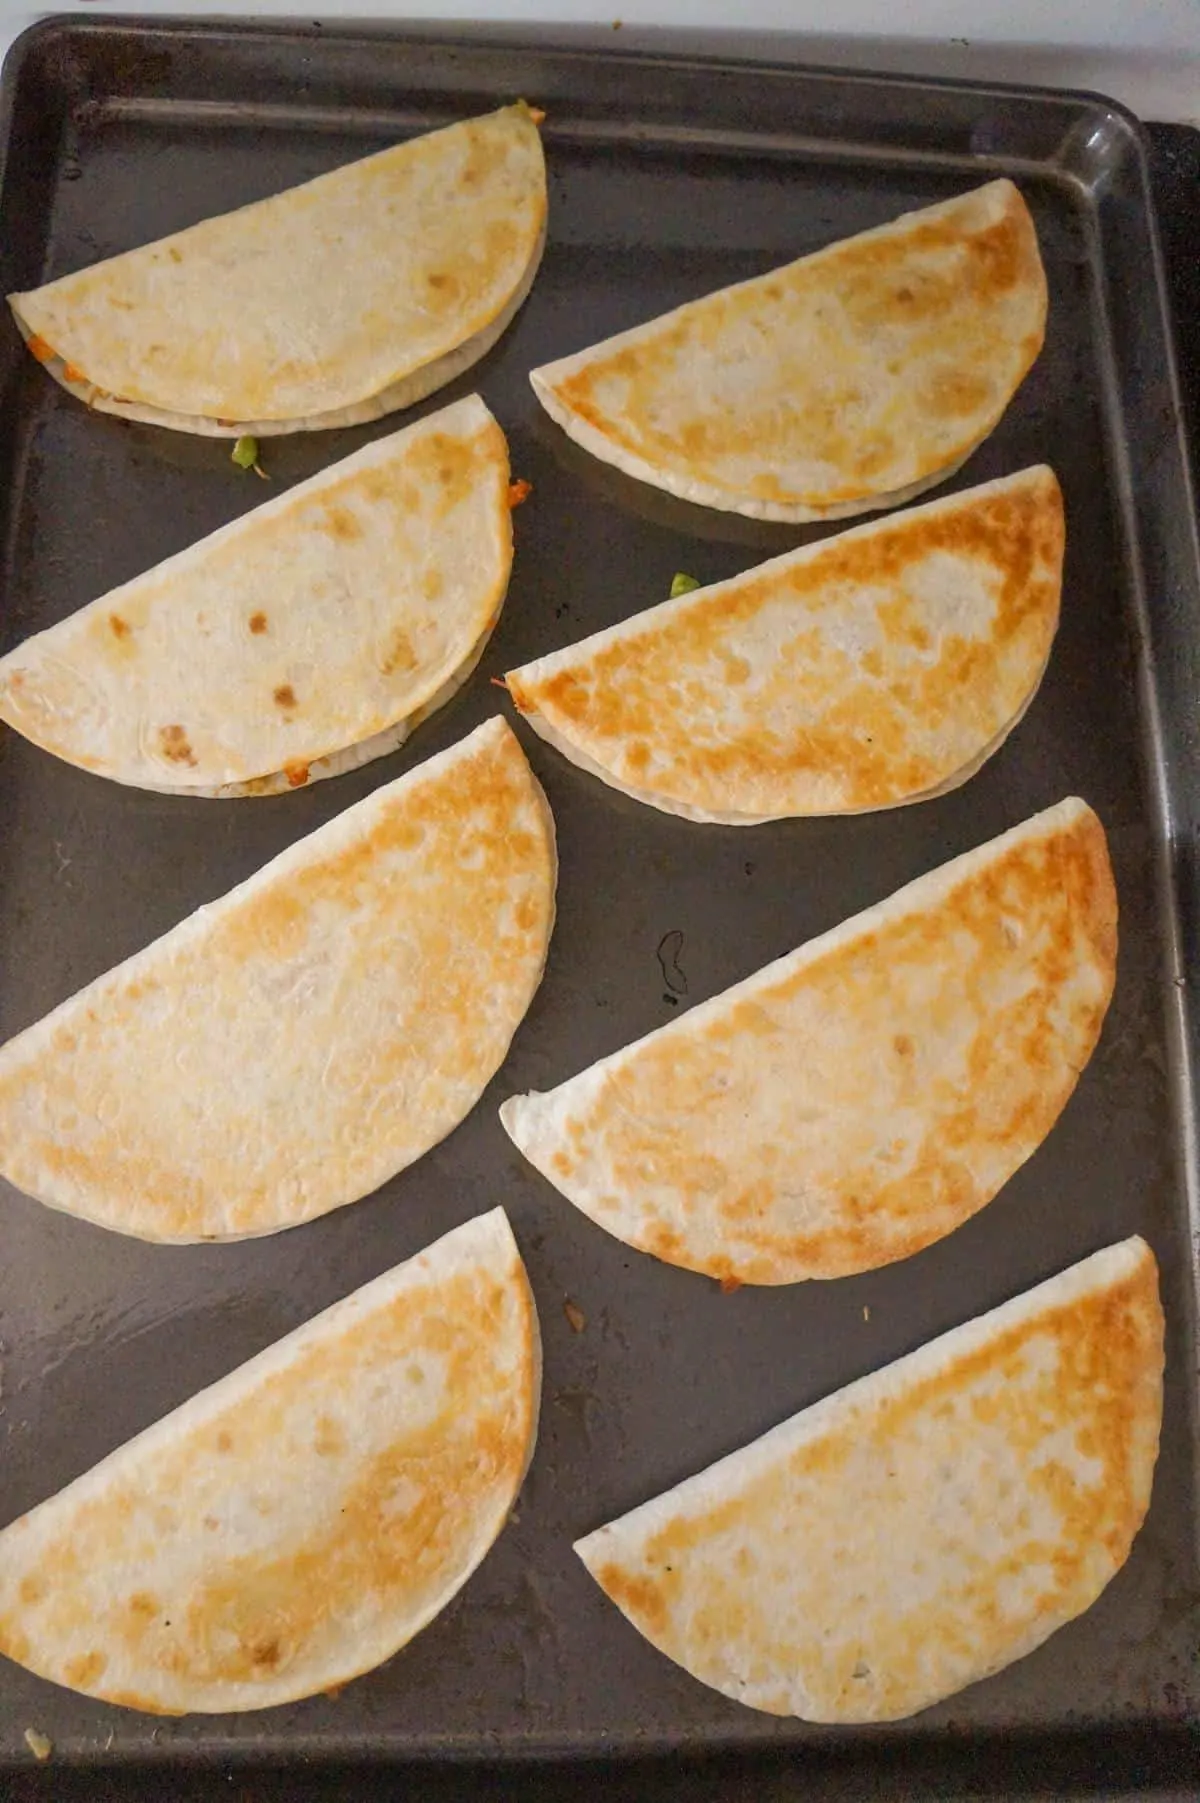 Easy Baked Chicken Quesadillas are a simple weeknight dinner recipe made with flour tortillas loaded with shredded chicken, taco seasoning, green peppers, red onions and cheese before baking in the oven.